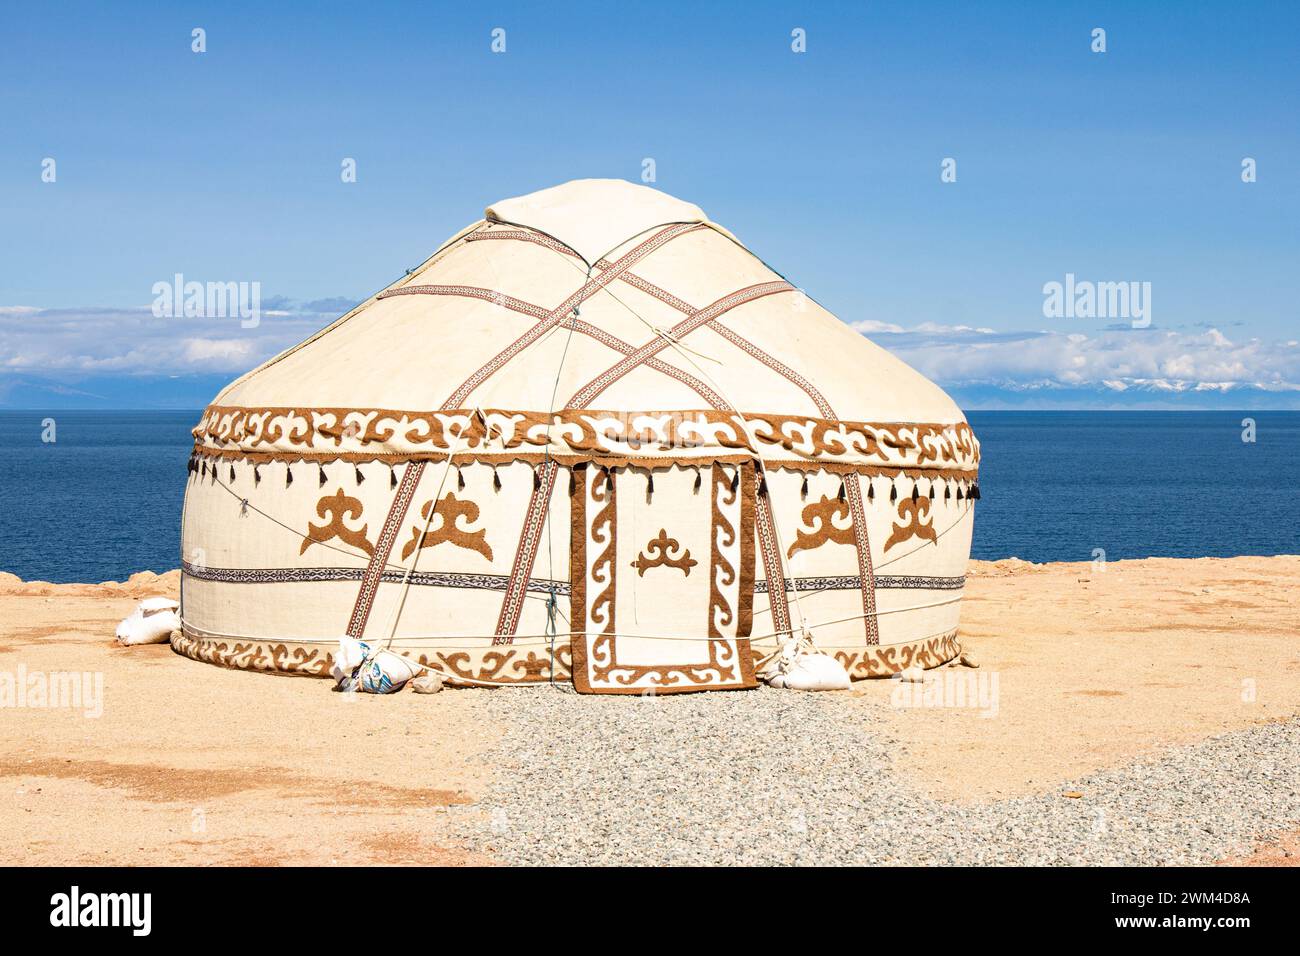 Traditional Yurt. National nomadic old house of Central Asia with blue sky on background. Issyk Kul high alpine lake in the Tian Shan Mountains. Kyrgy Stock Photo